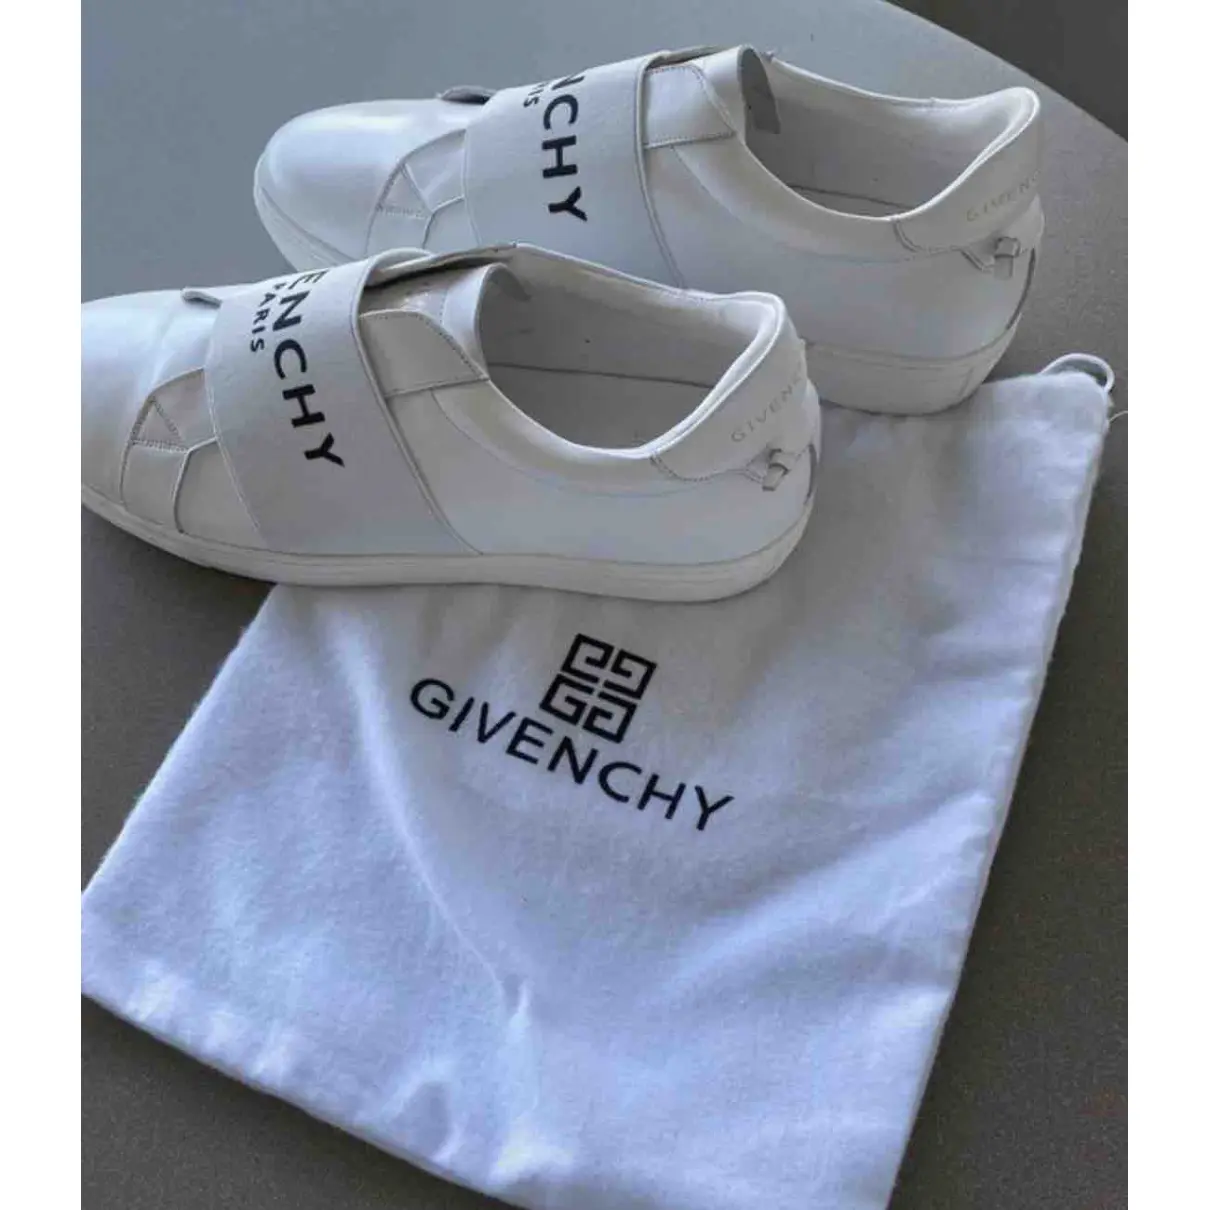 Leather low trainers Givenchy